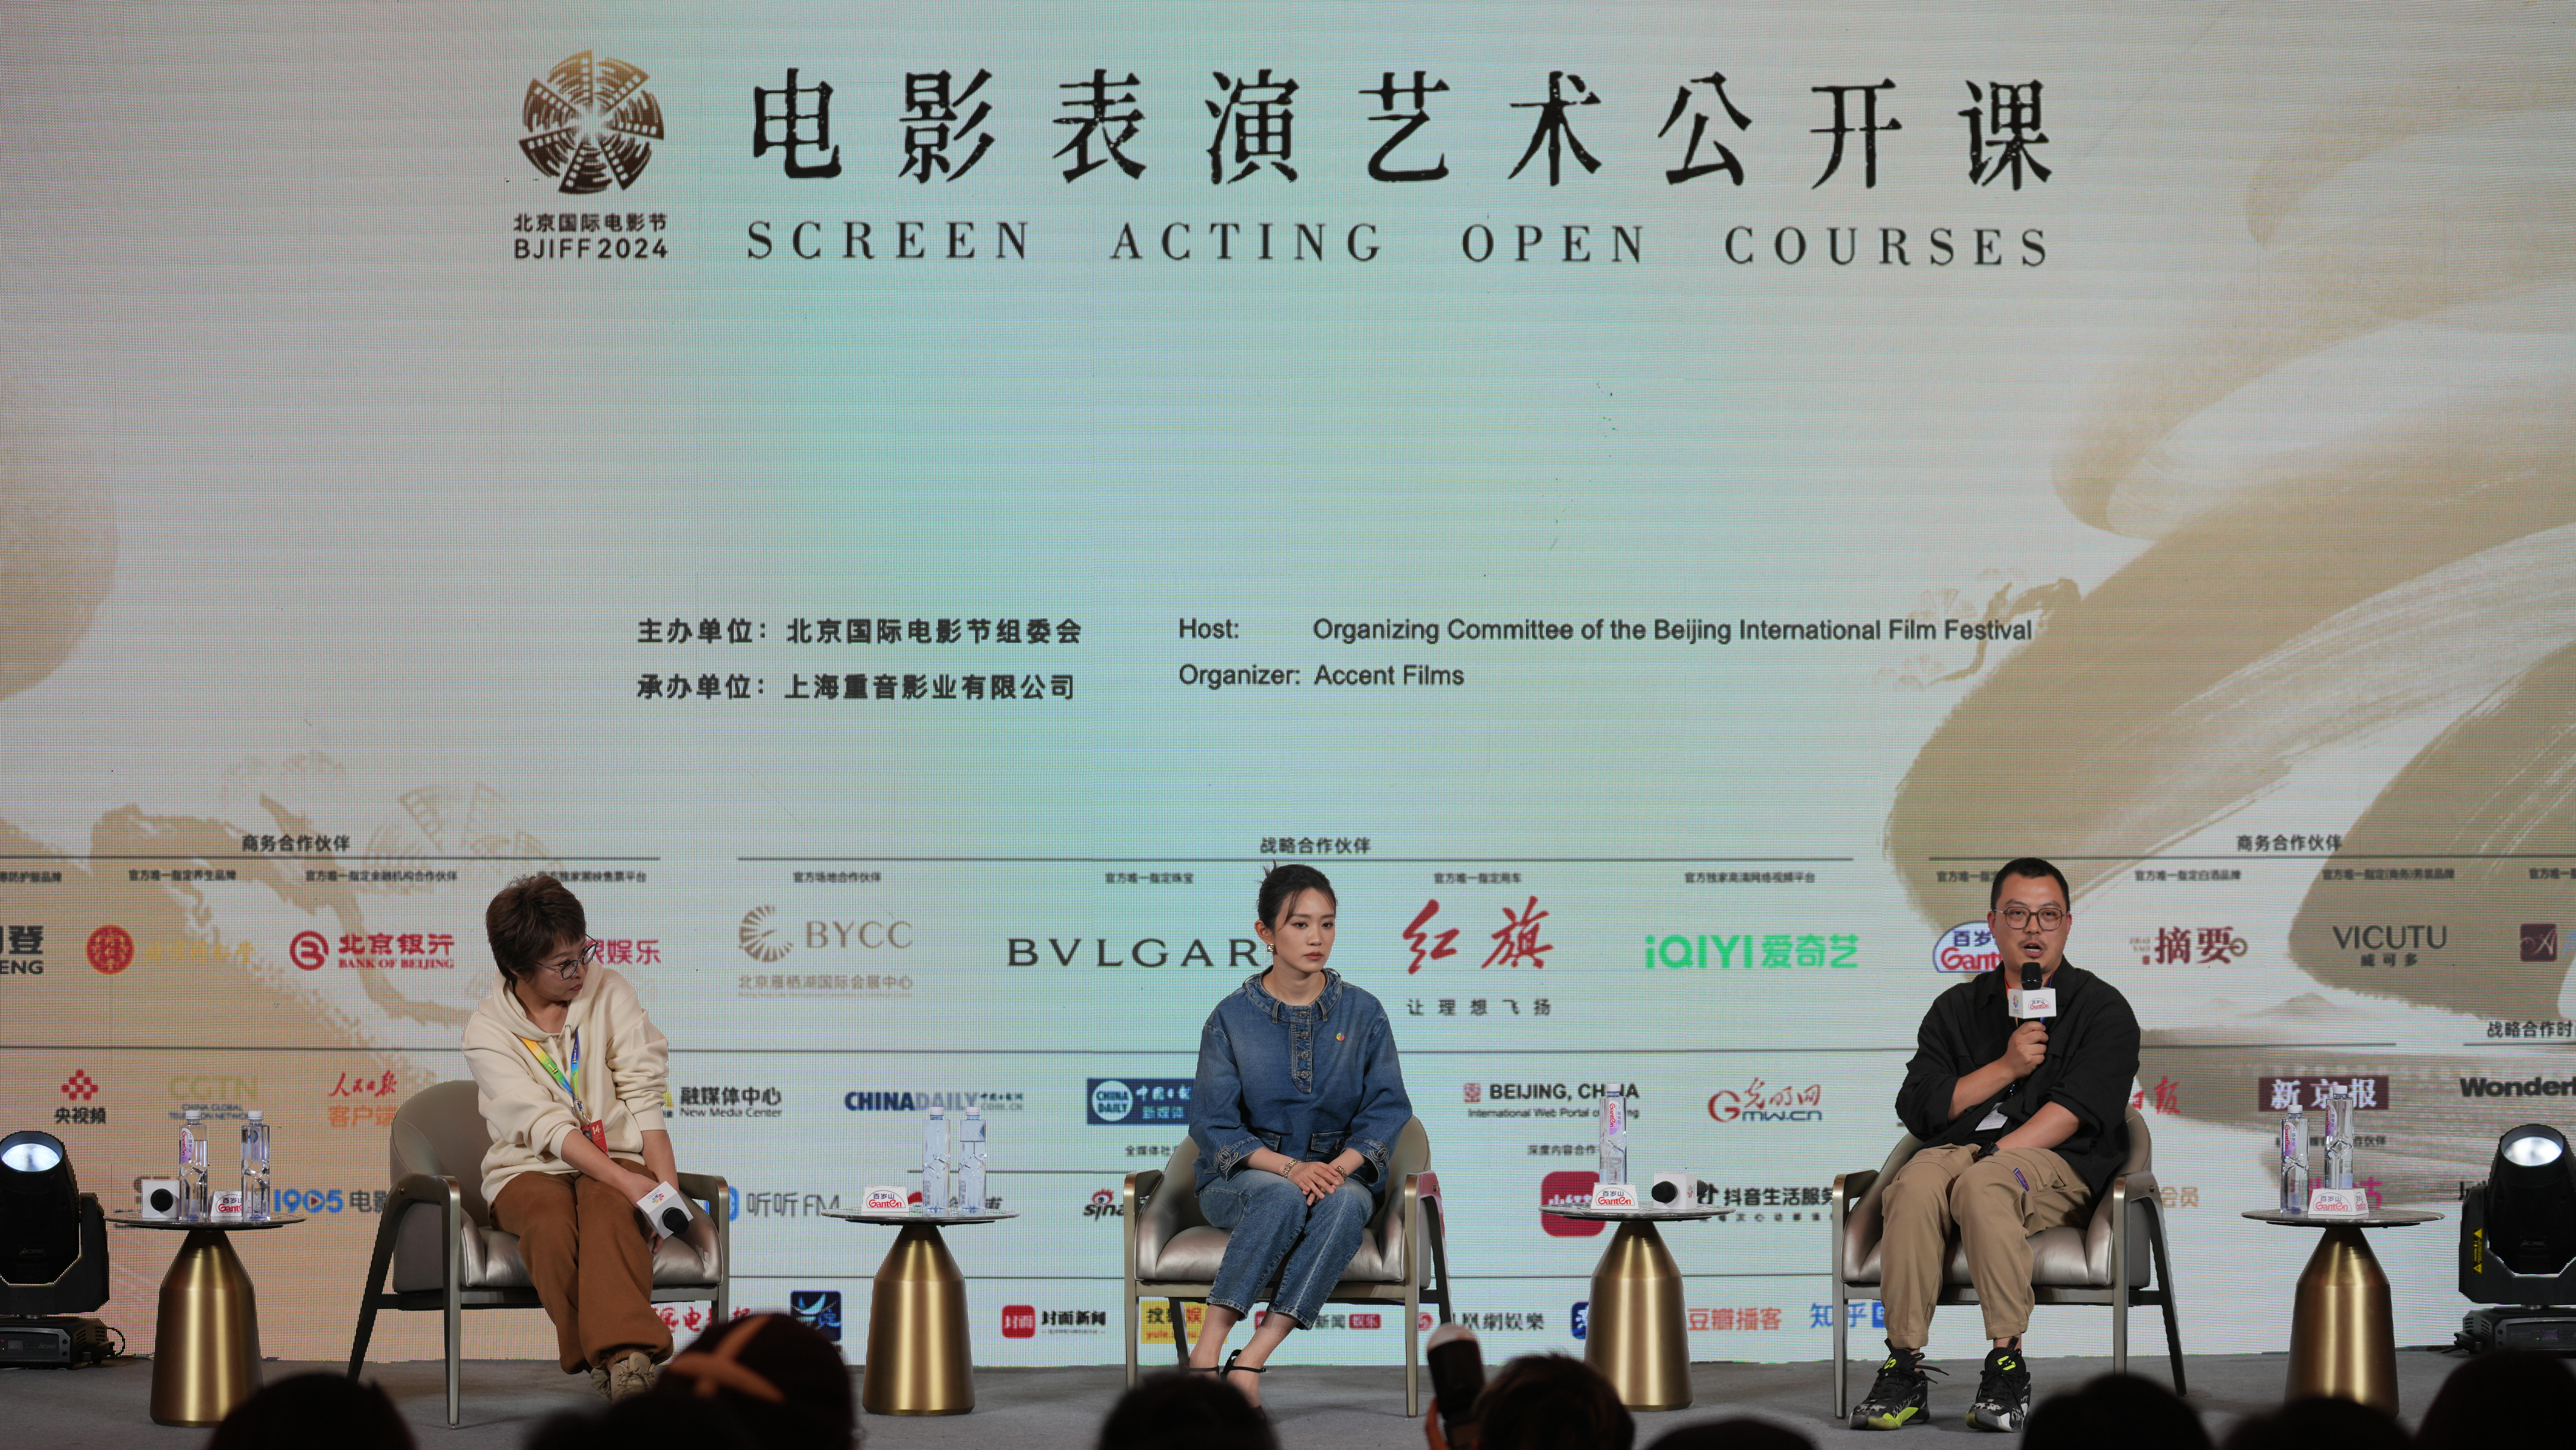 Screen acting open course at 14th BJIFF enthralls attendees